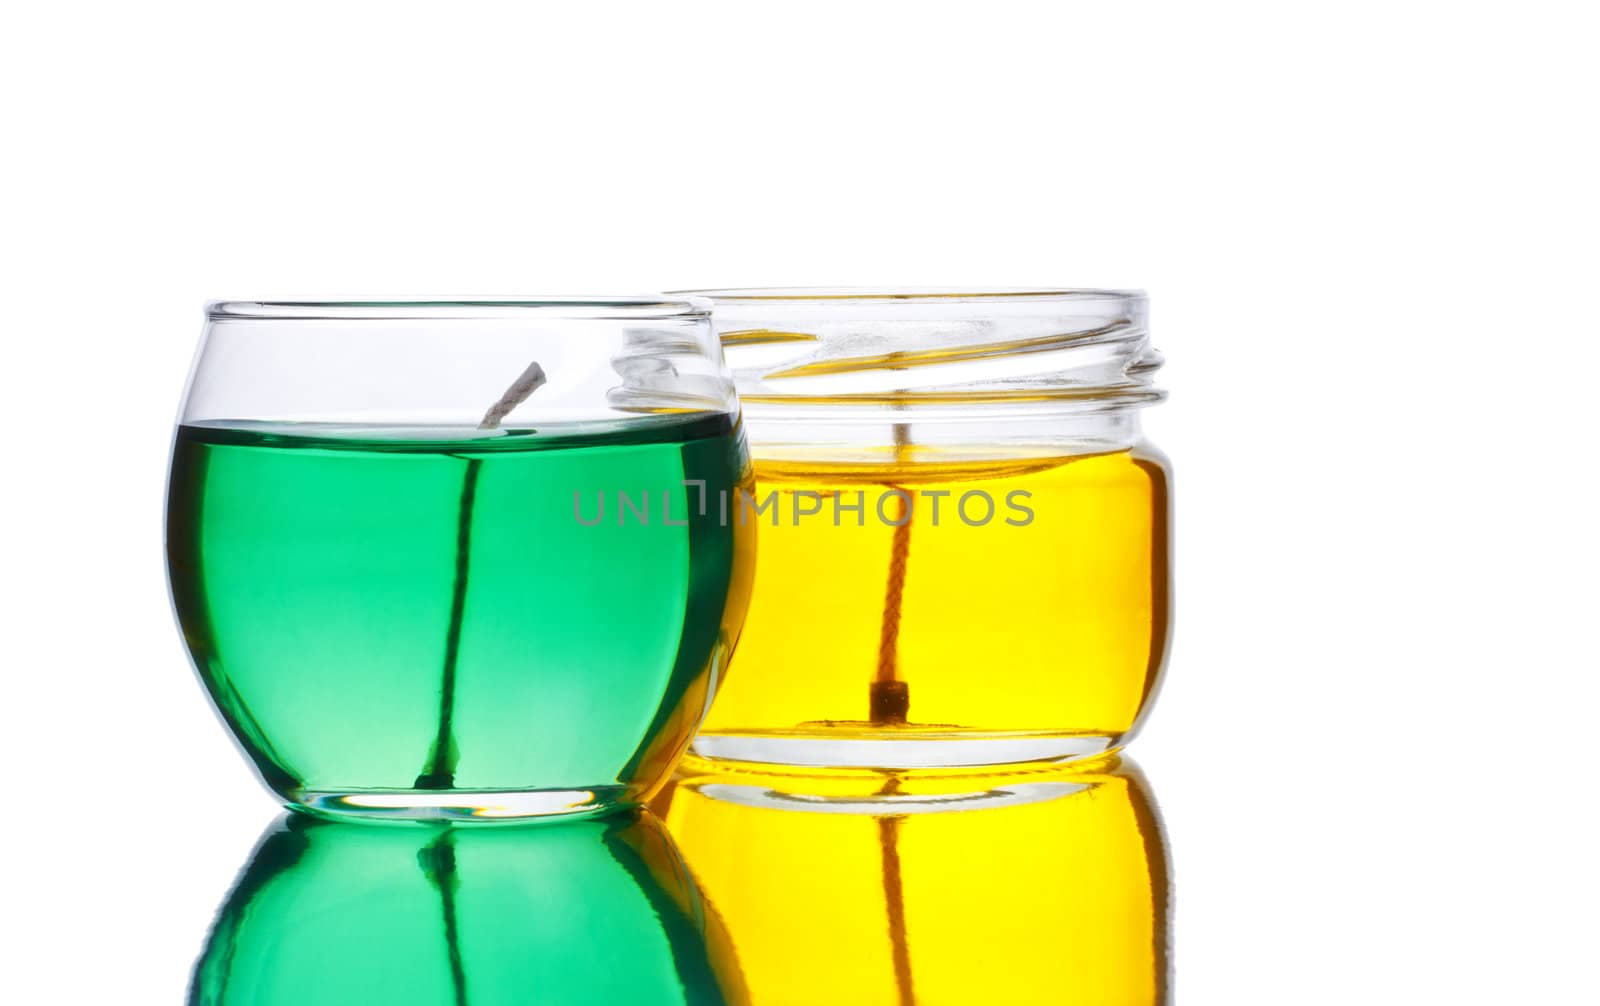 green and yellow gel candles isolated on white